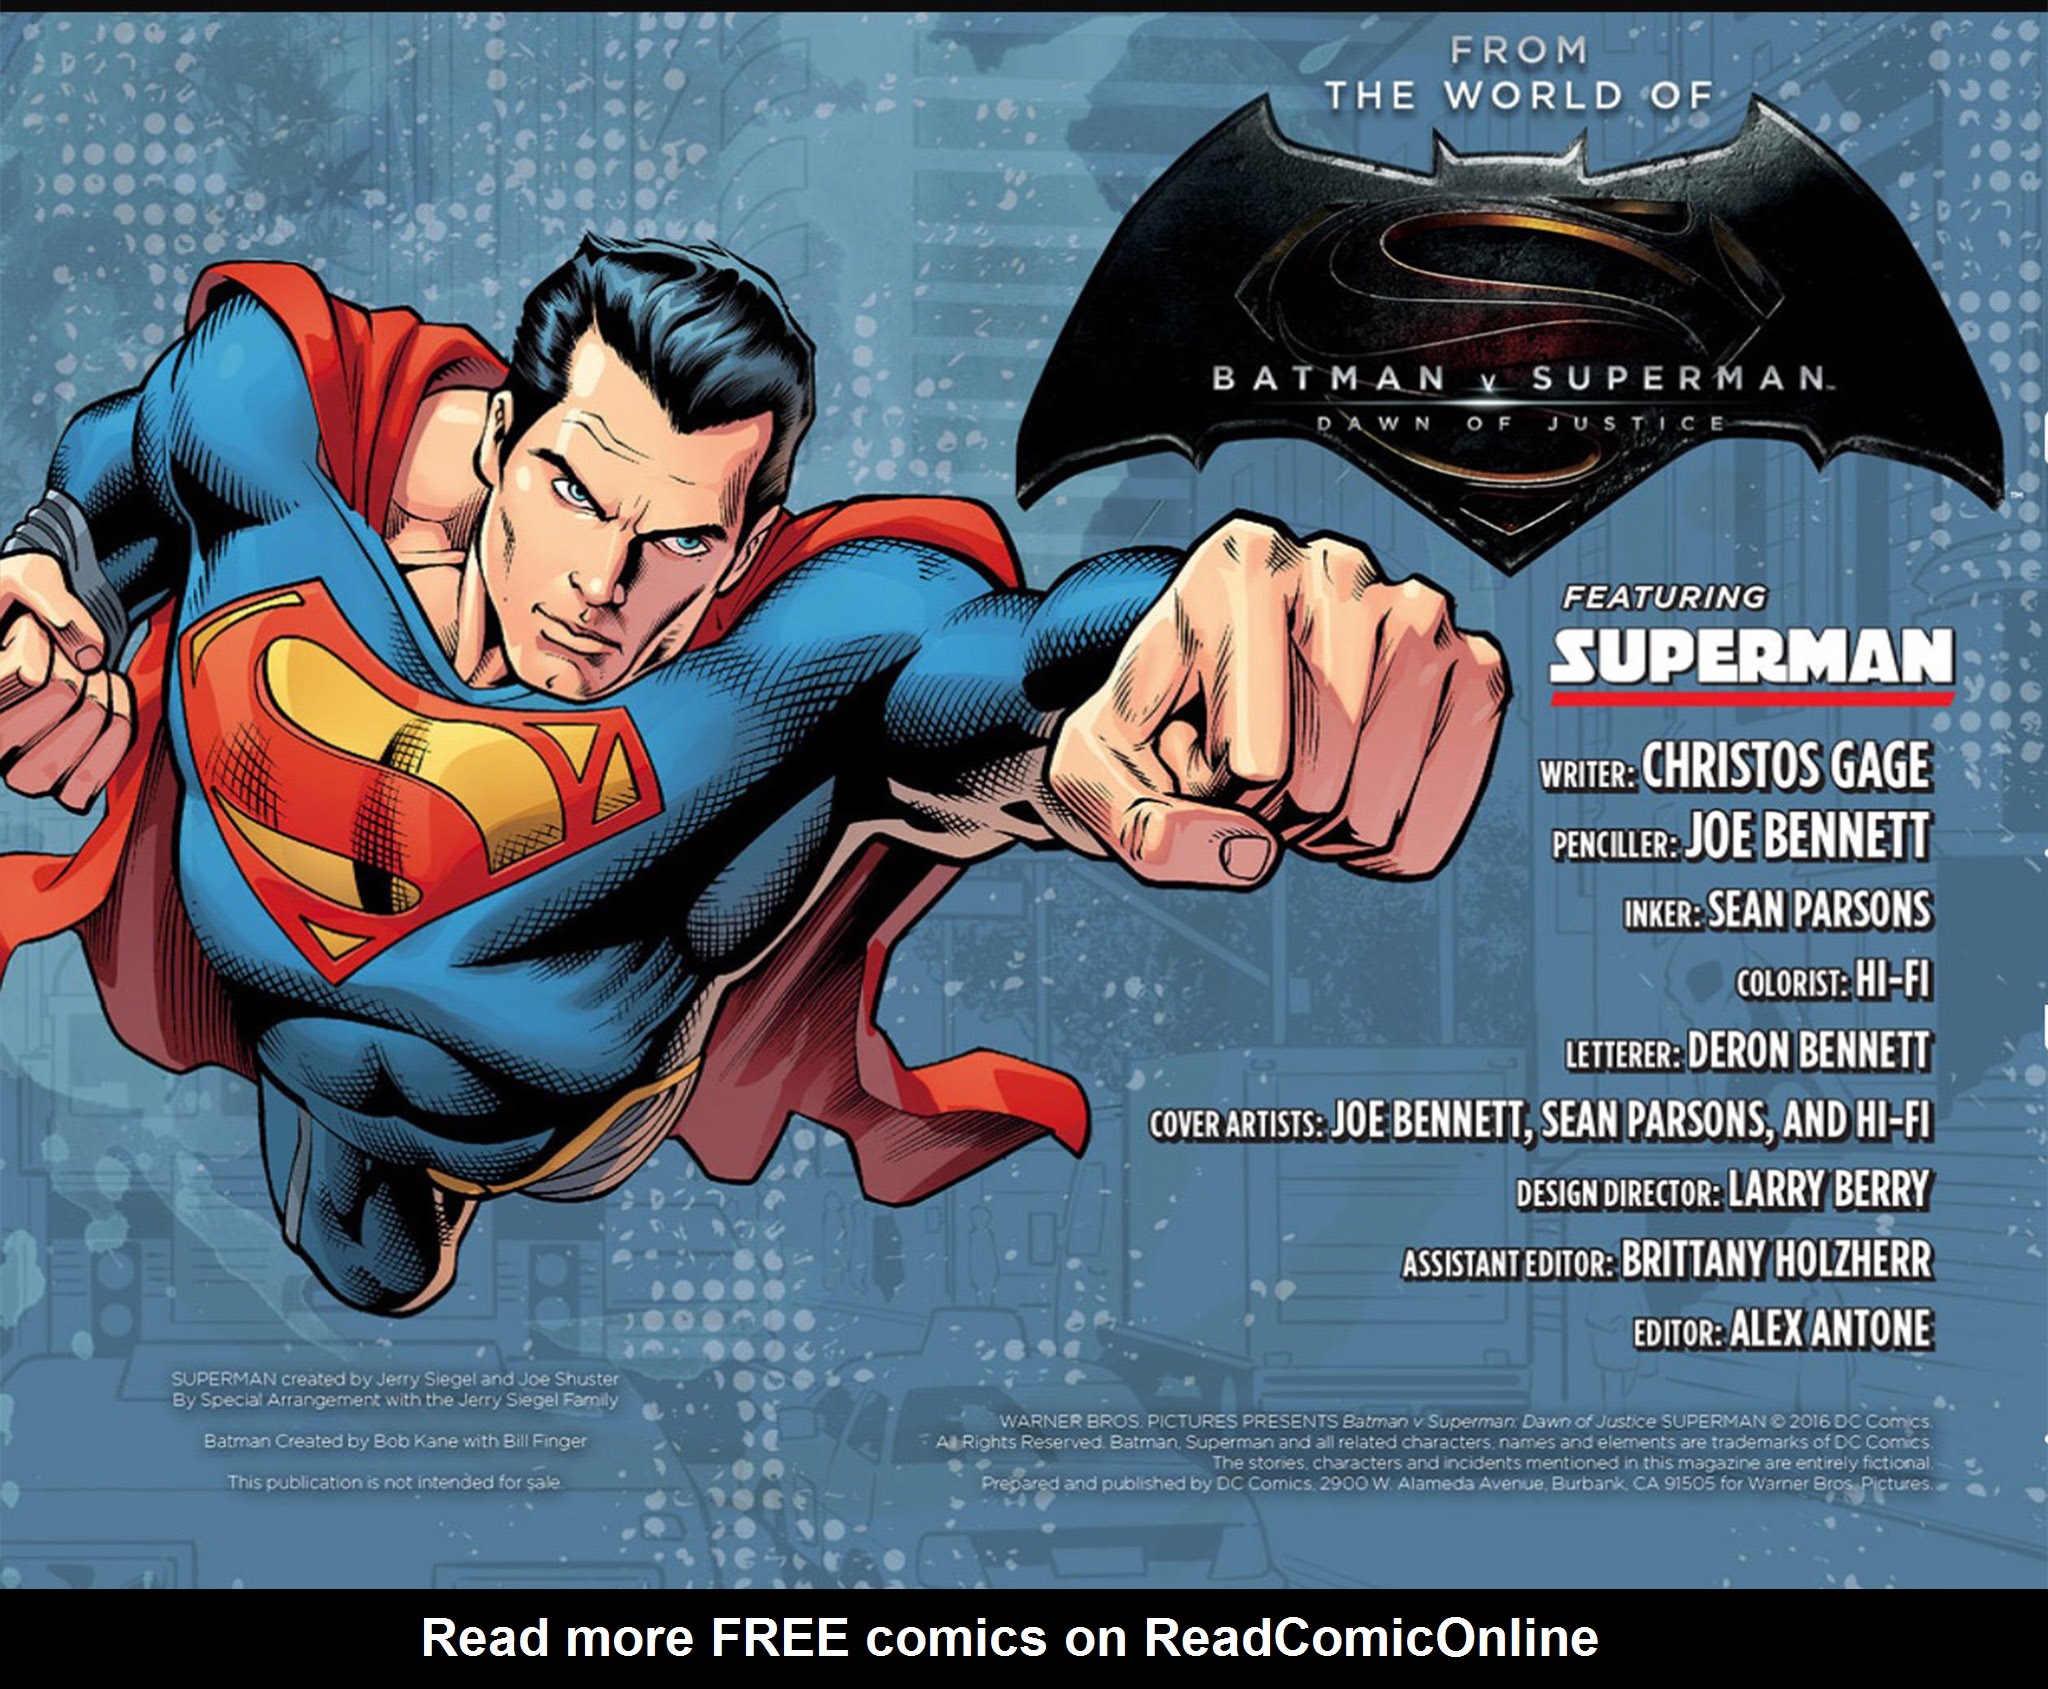 Read online Warner Bros. Pictures Presents Batman v Superman: Dawn of Justice comic -  Issue #4 - 2